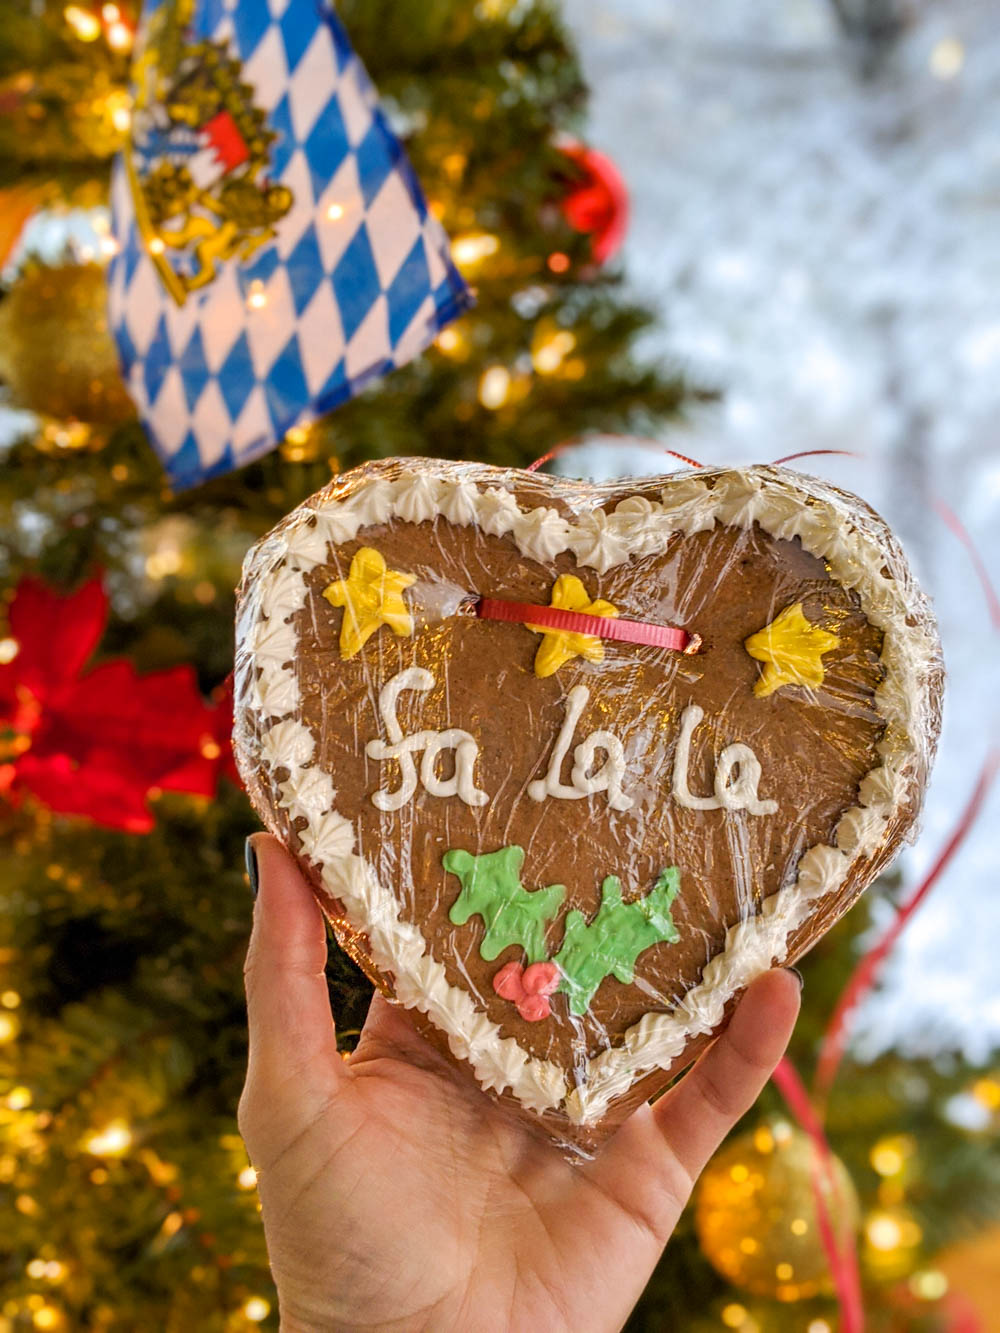 German Christmas market foods and drinks you can enjoy at home (with recipes) | lebkuchenherzen, gingerbread heart cookies